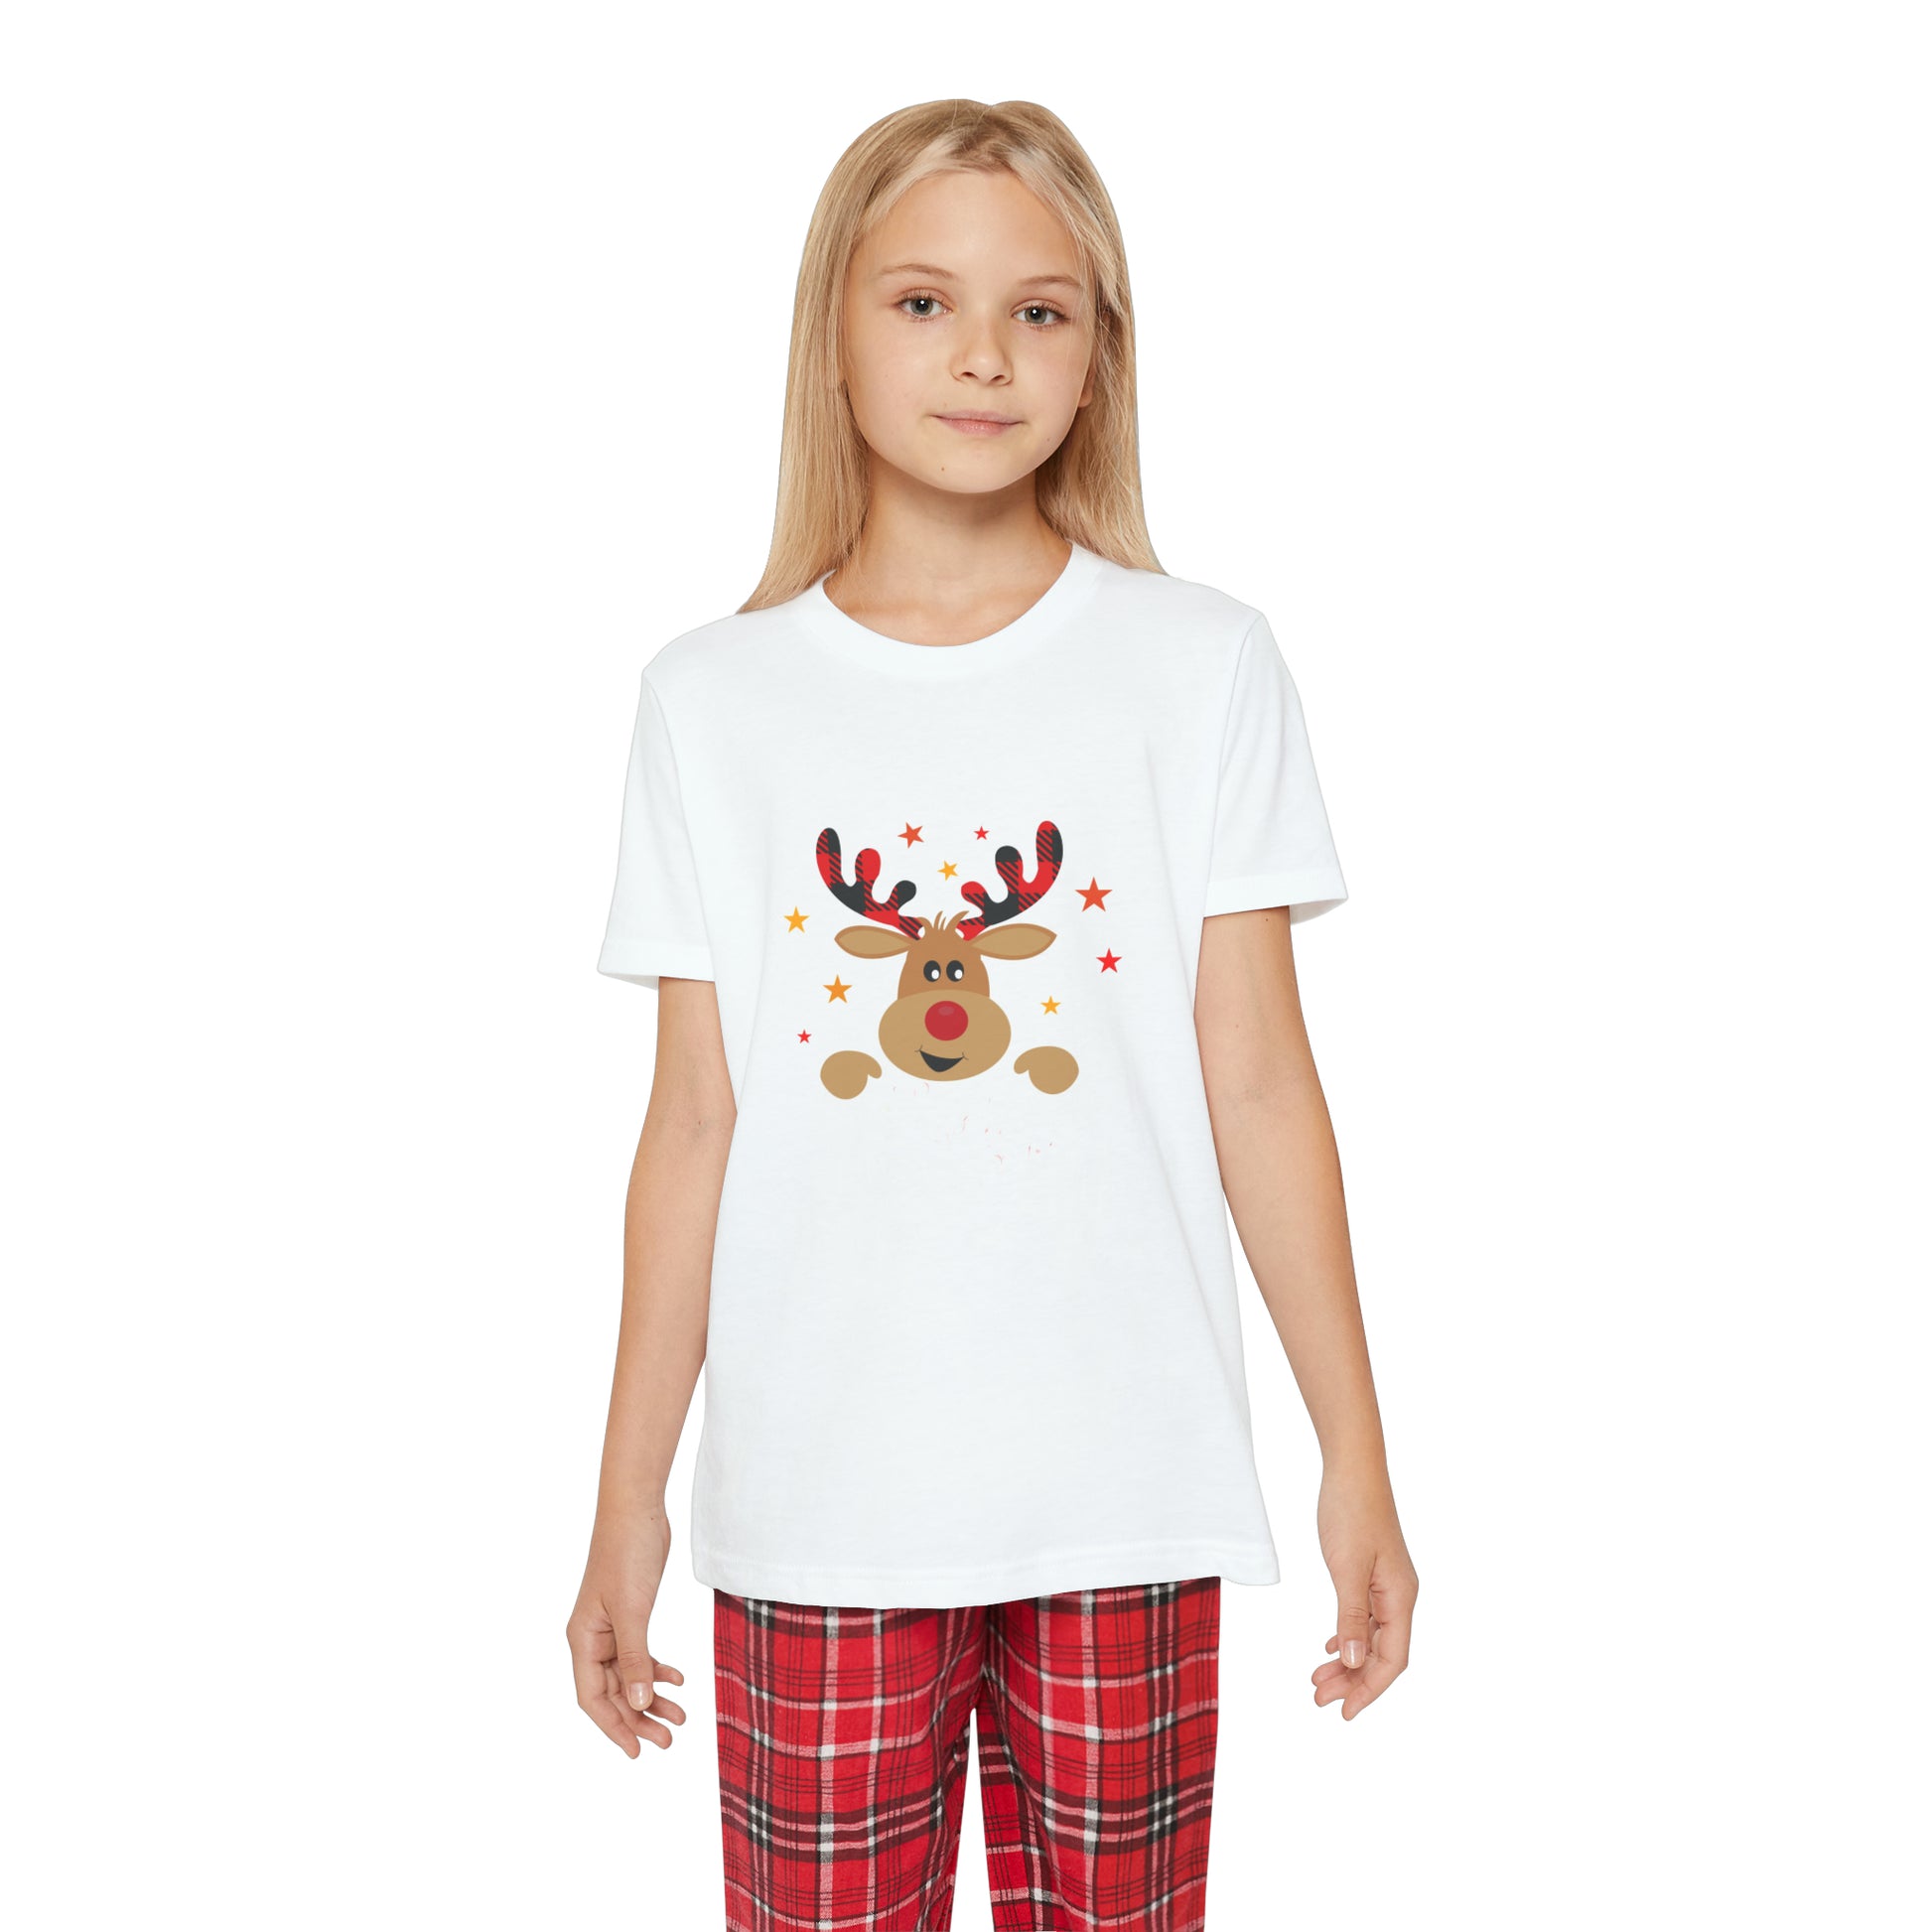 A young girl in Printify's Kids Holiday Pajama Set, featuring a reindeer t-shirt and plaid pajamas made with 100% cotton.